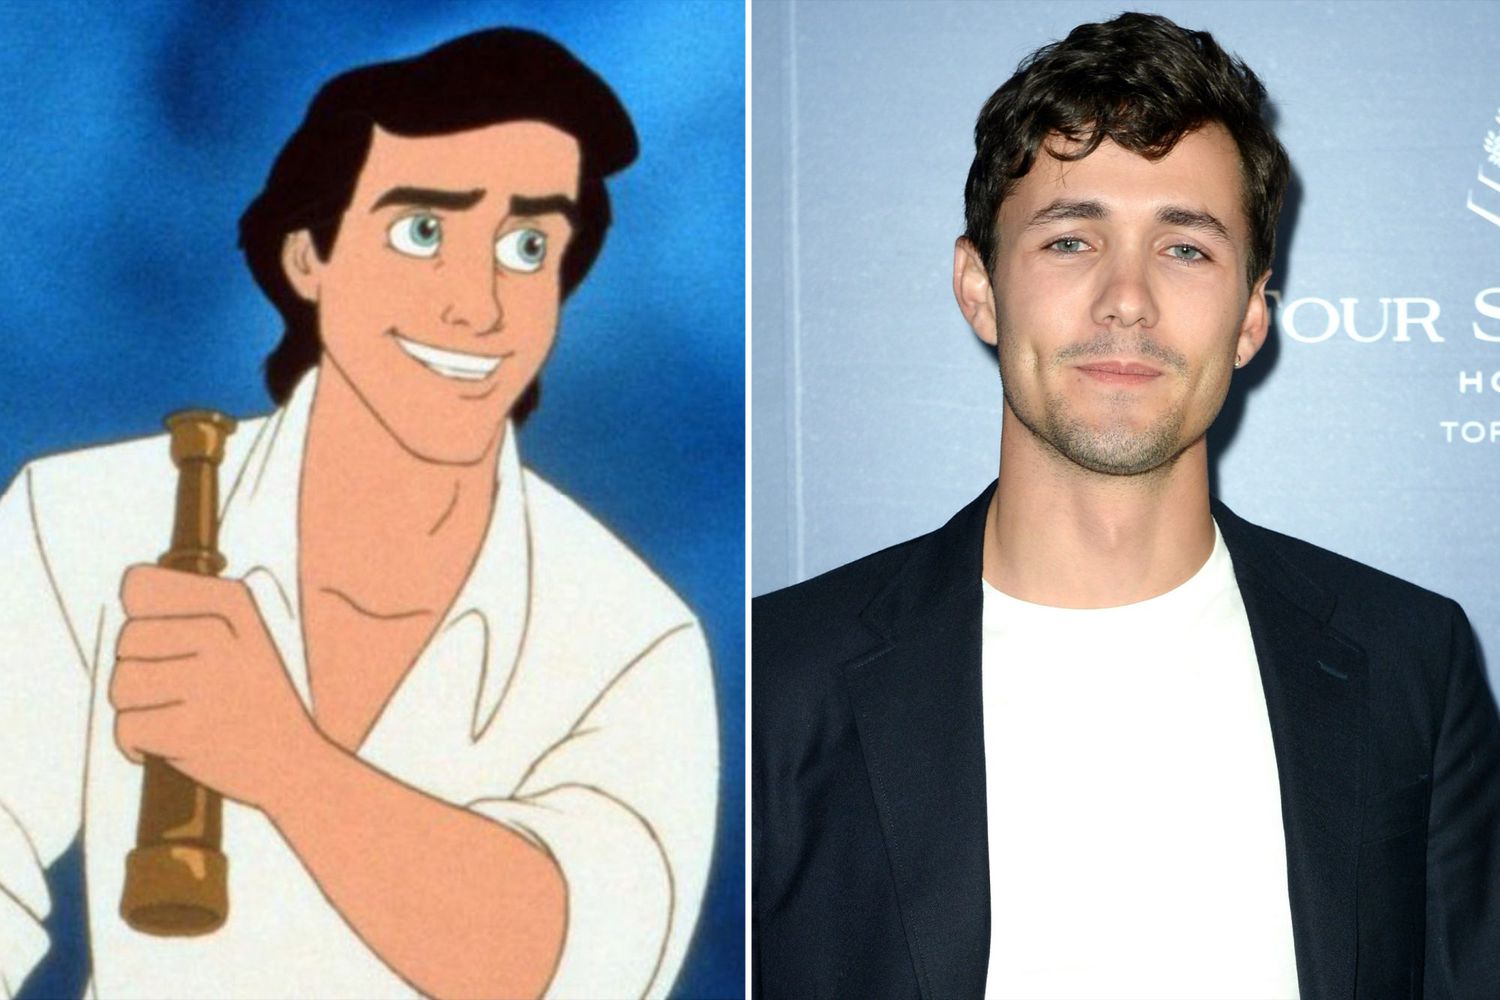 Little Mermaid live-action movie casts Jonah Hauer-King as Prince Eric | EW.com